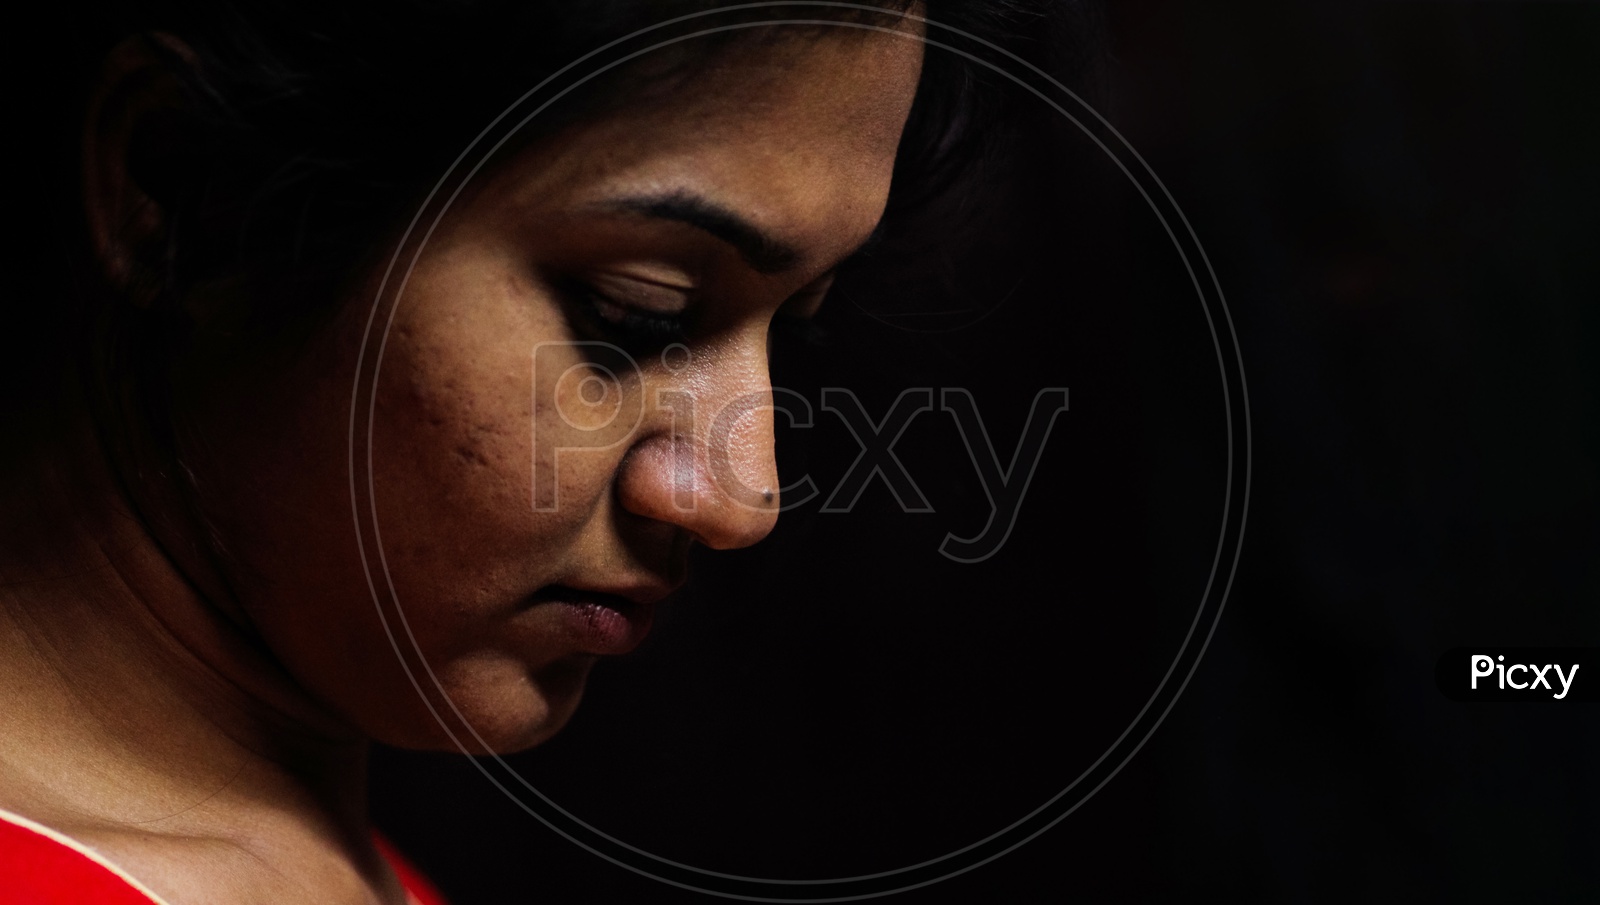 An Indian Female Staring Down In Worry And Depression In Black Background With Selective Focus On Nose